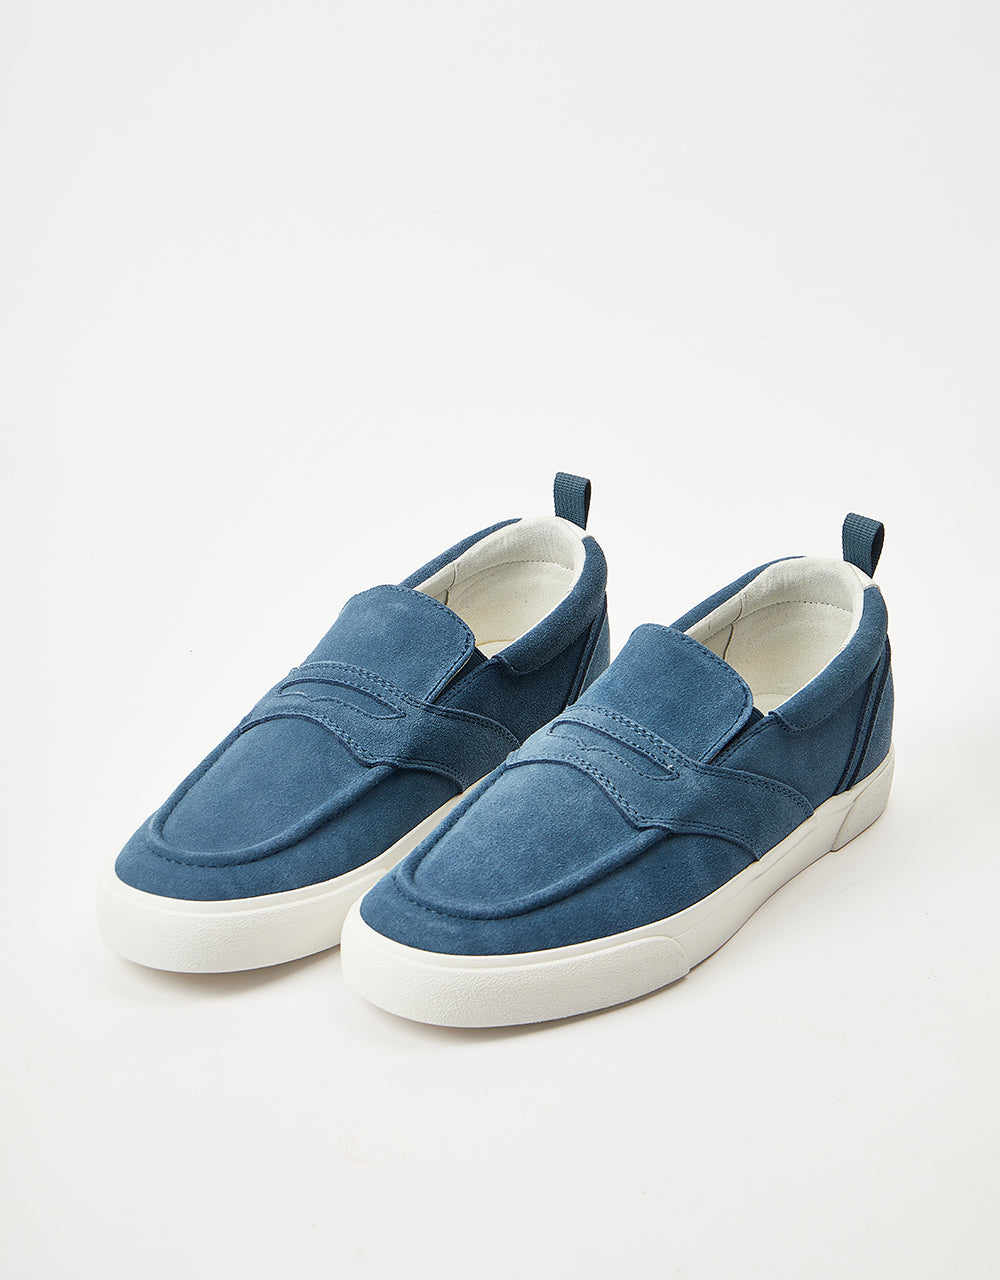 HØURS IS YOURS Cohiba SL30 Skate Shoes - Modern Blue